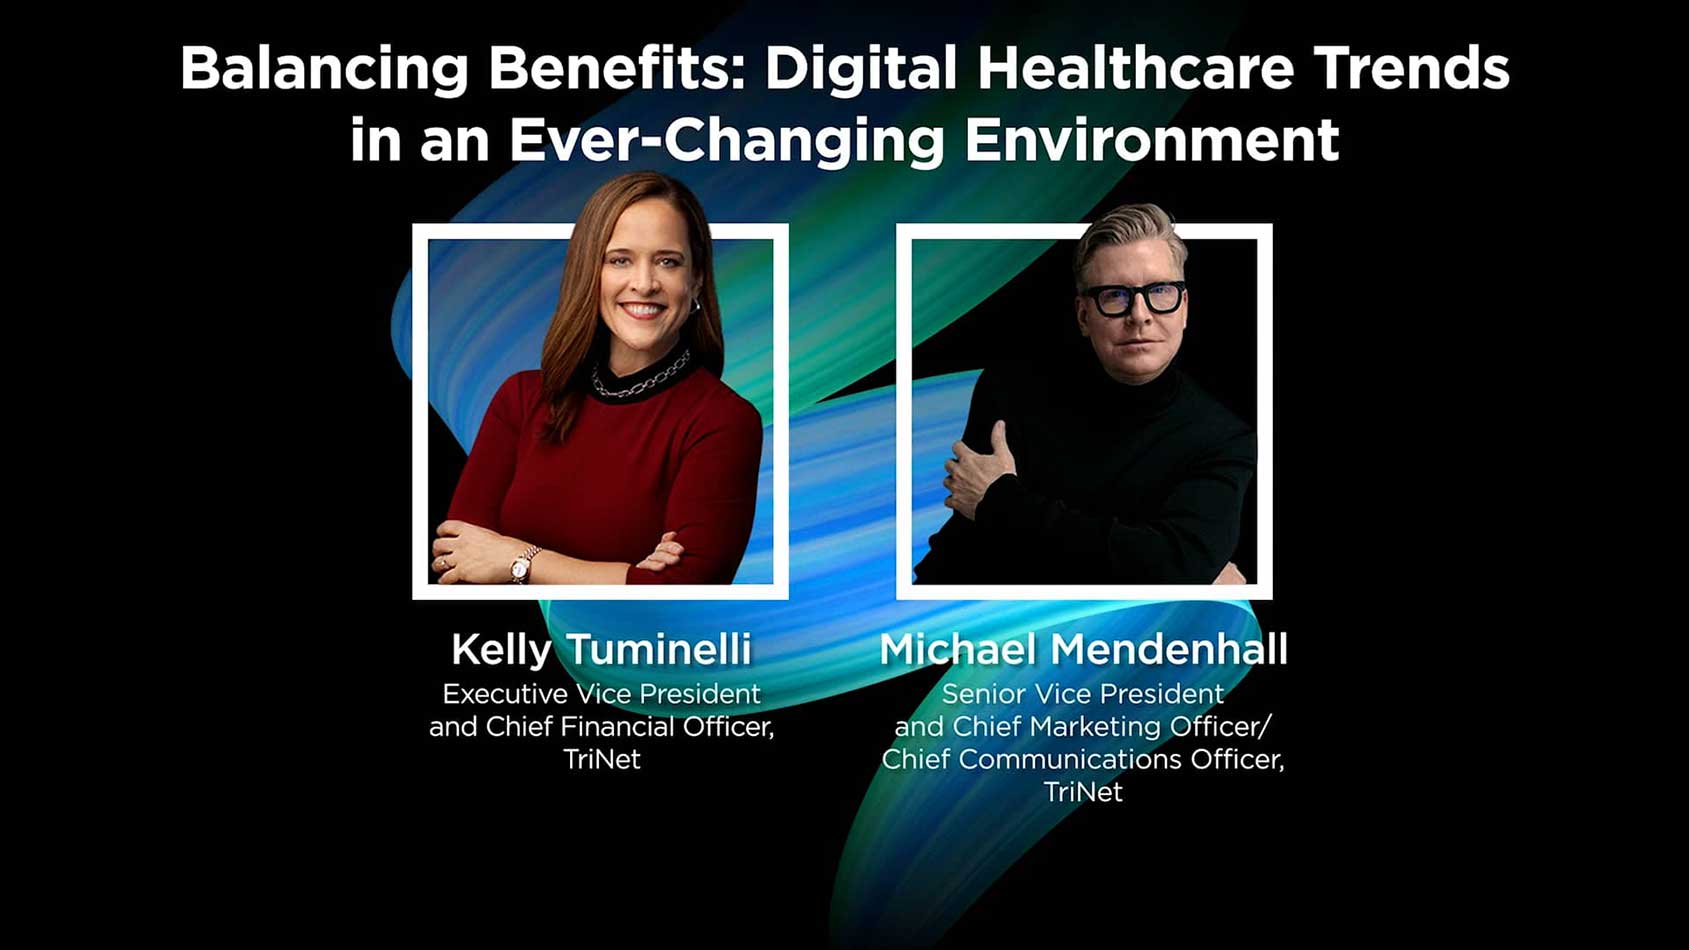 Balancing Benefits: Digital Healthcare Trends in an Ever-Changing Environment